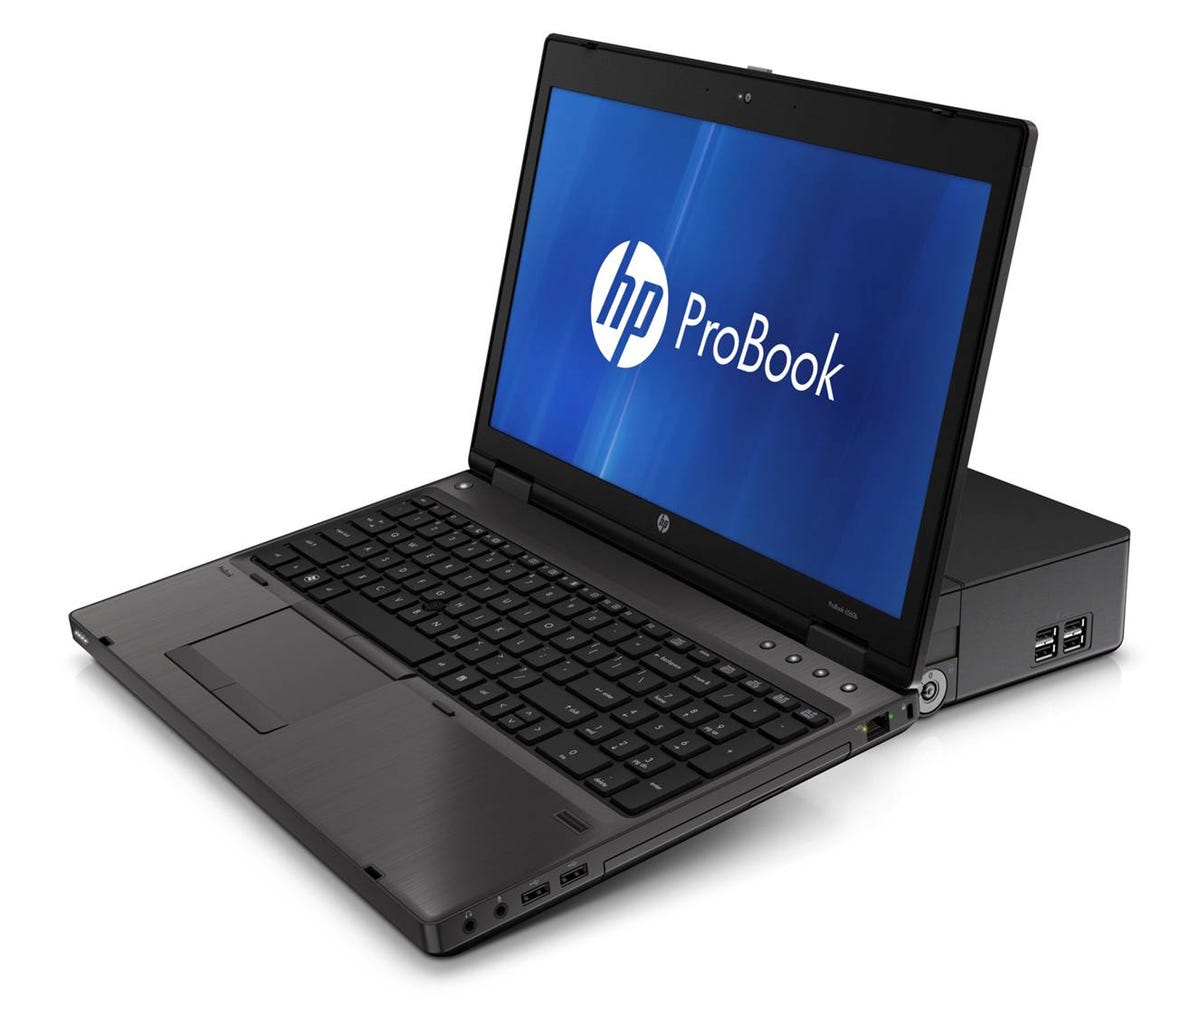 HP_ProBook_b-series_front_right_view_with_dock.jpg